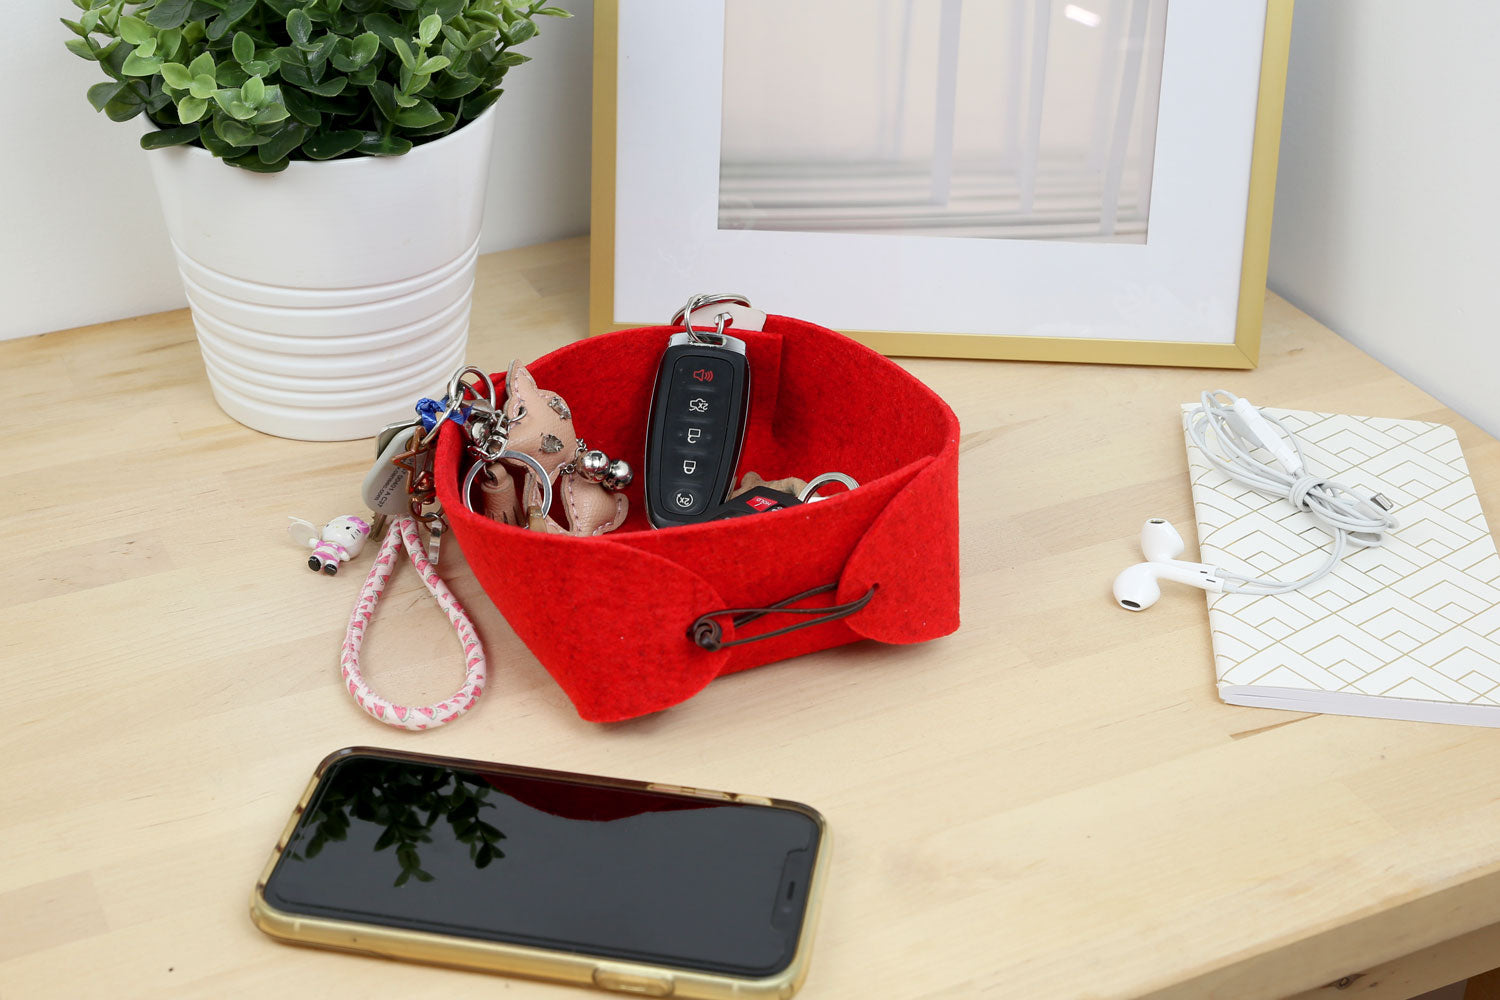 A red felt box with leather cord sitting on a wooden table. There are keys inside the box. A phone, notebook, and a pair of earbuds are next to the box.